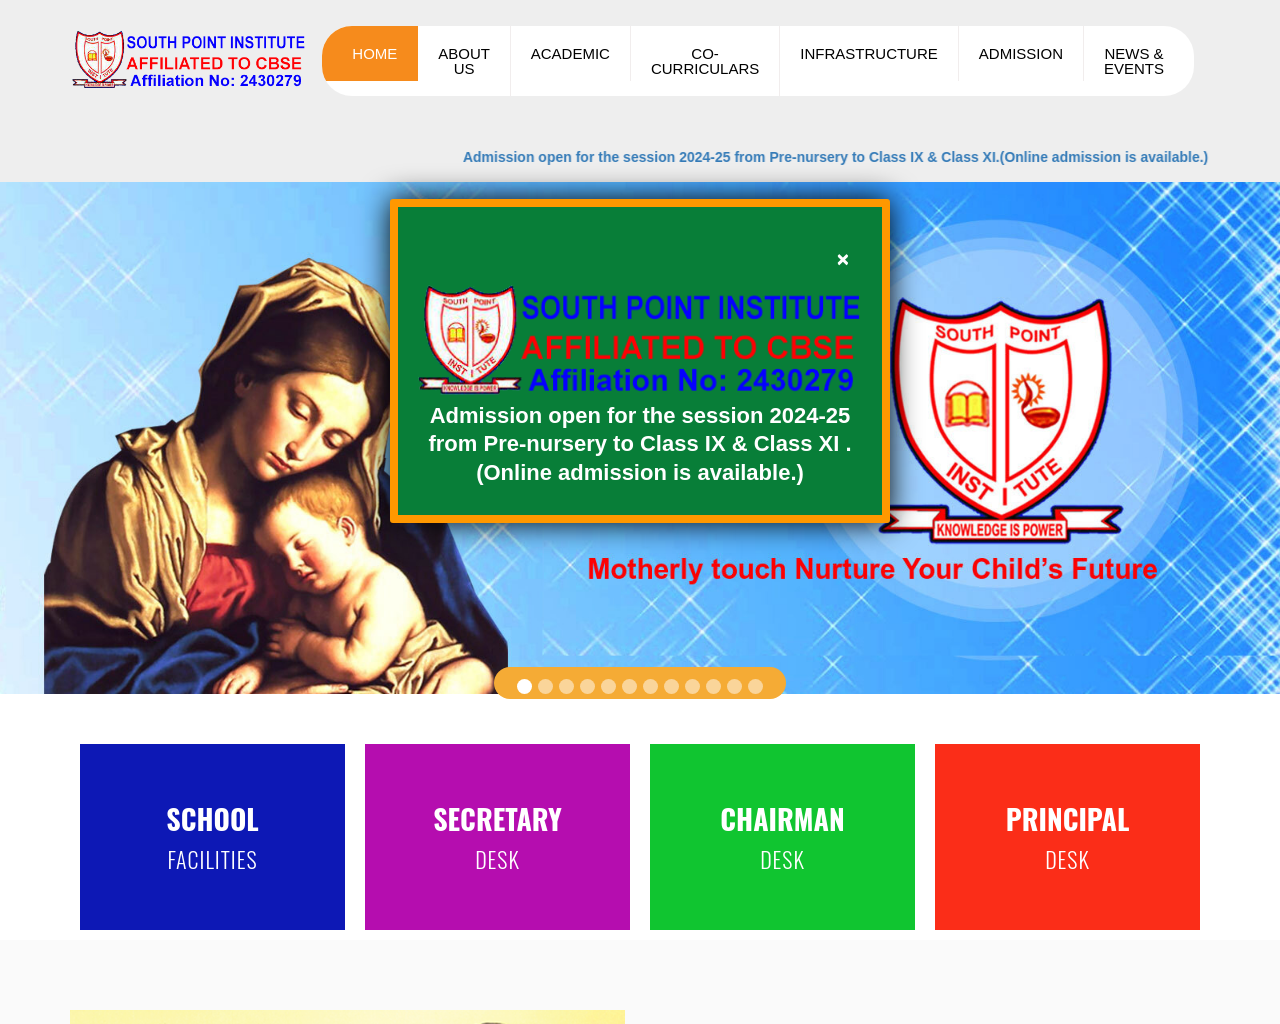 southpointinstitutehowrah.com